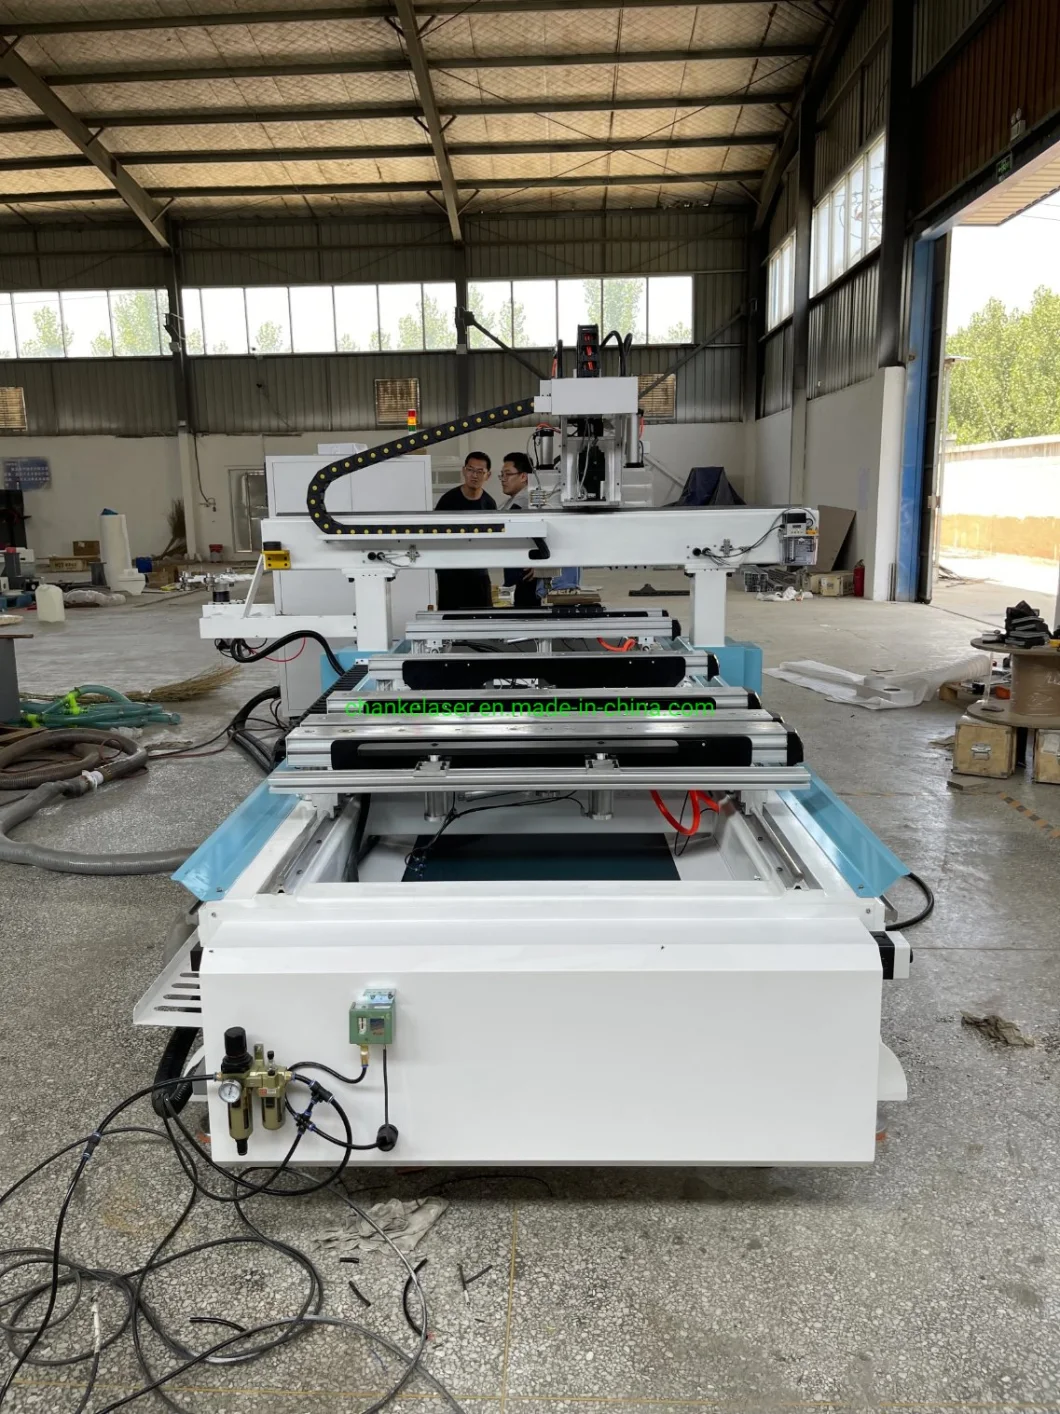 CNC Wooden Door Locking CNC Router Machine Engraving Machining Center 3D Wood Working Cutting Drilling Engraver Table Legs CNC Mechanical Woodworking Machinery